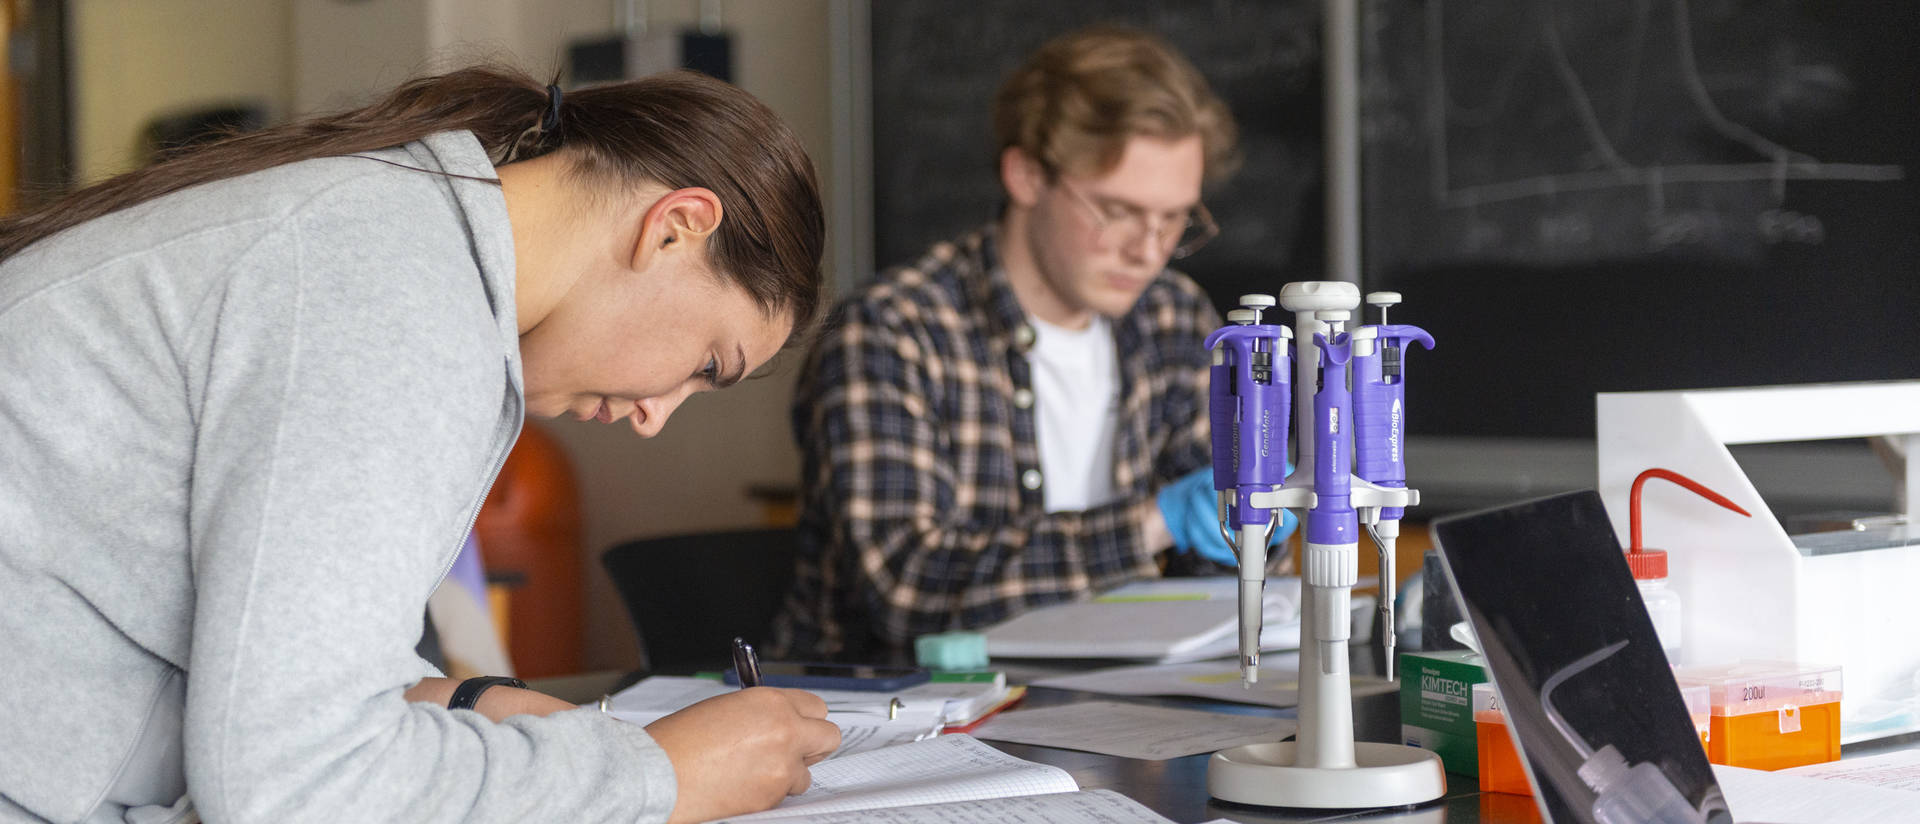 Biochemistry students conduct an experiment in a science lab on campus.